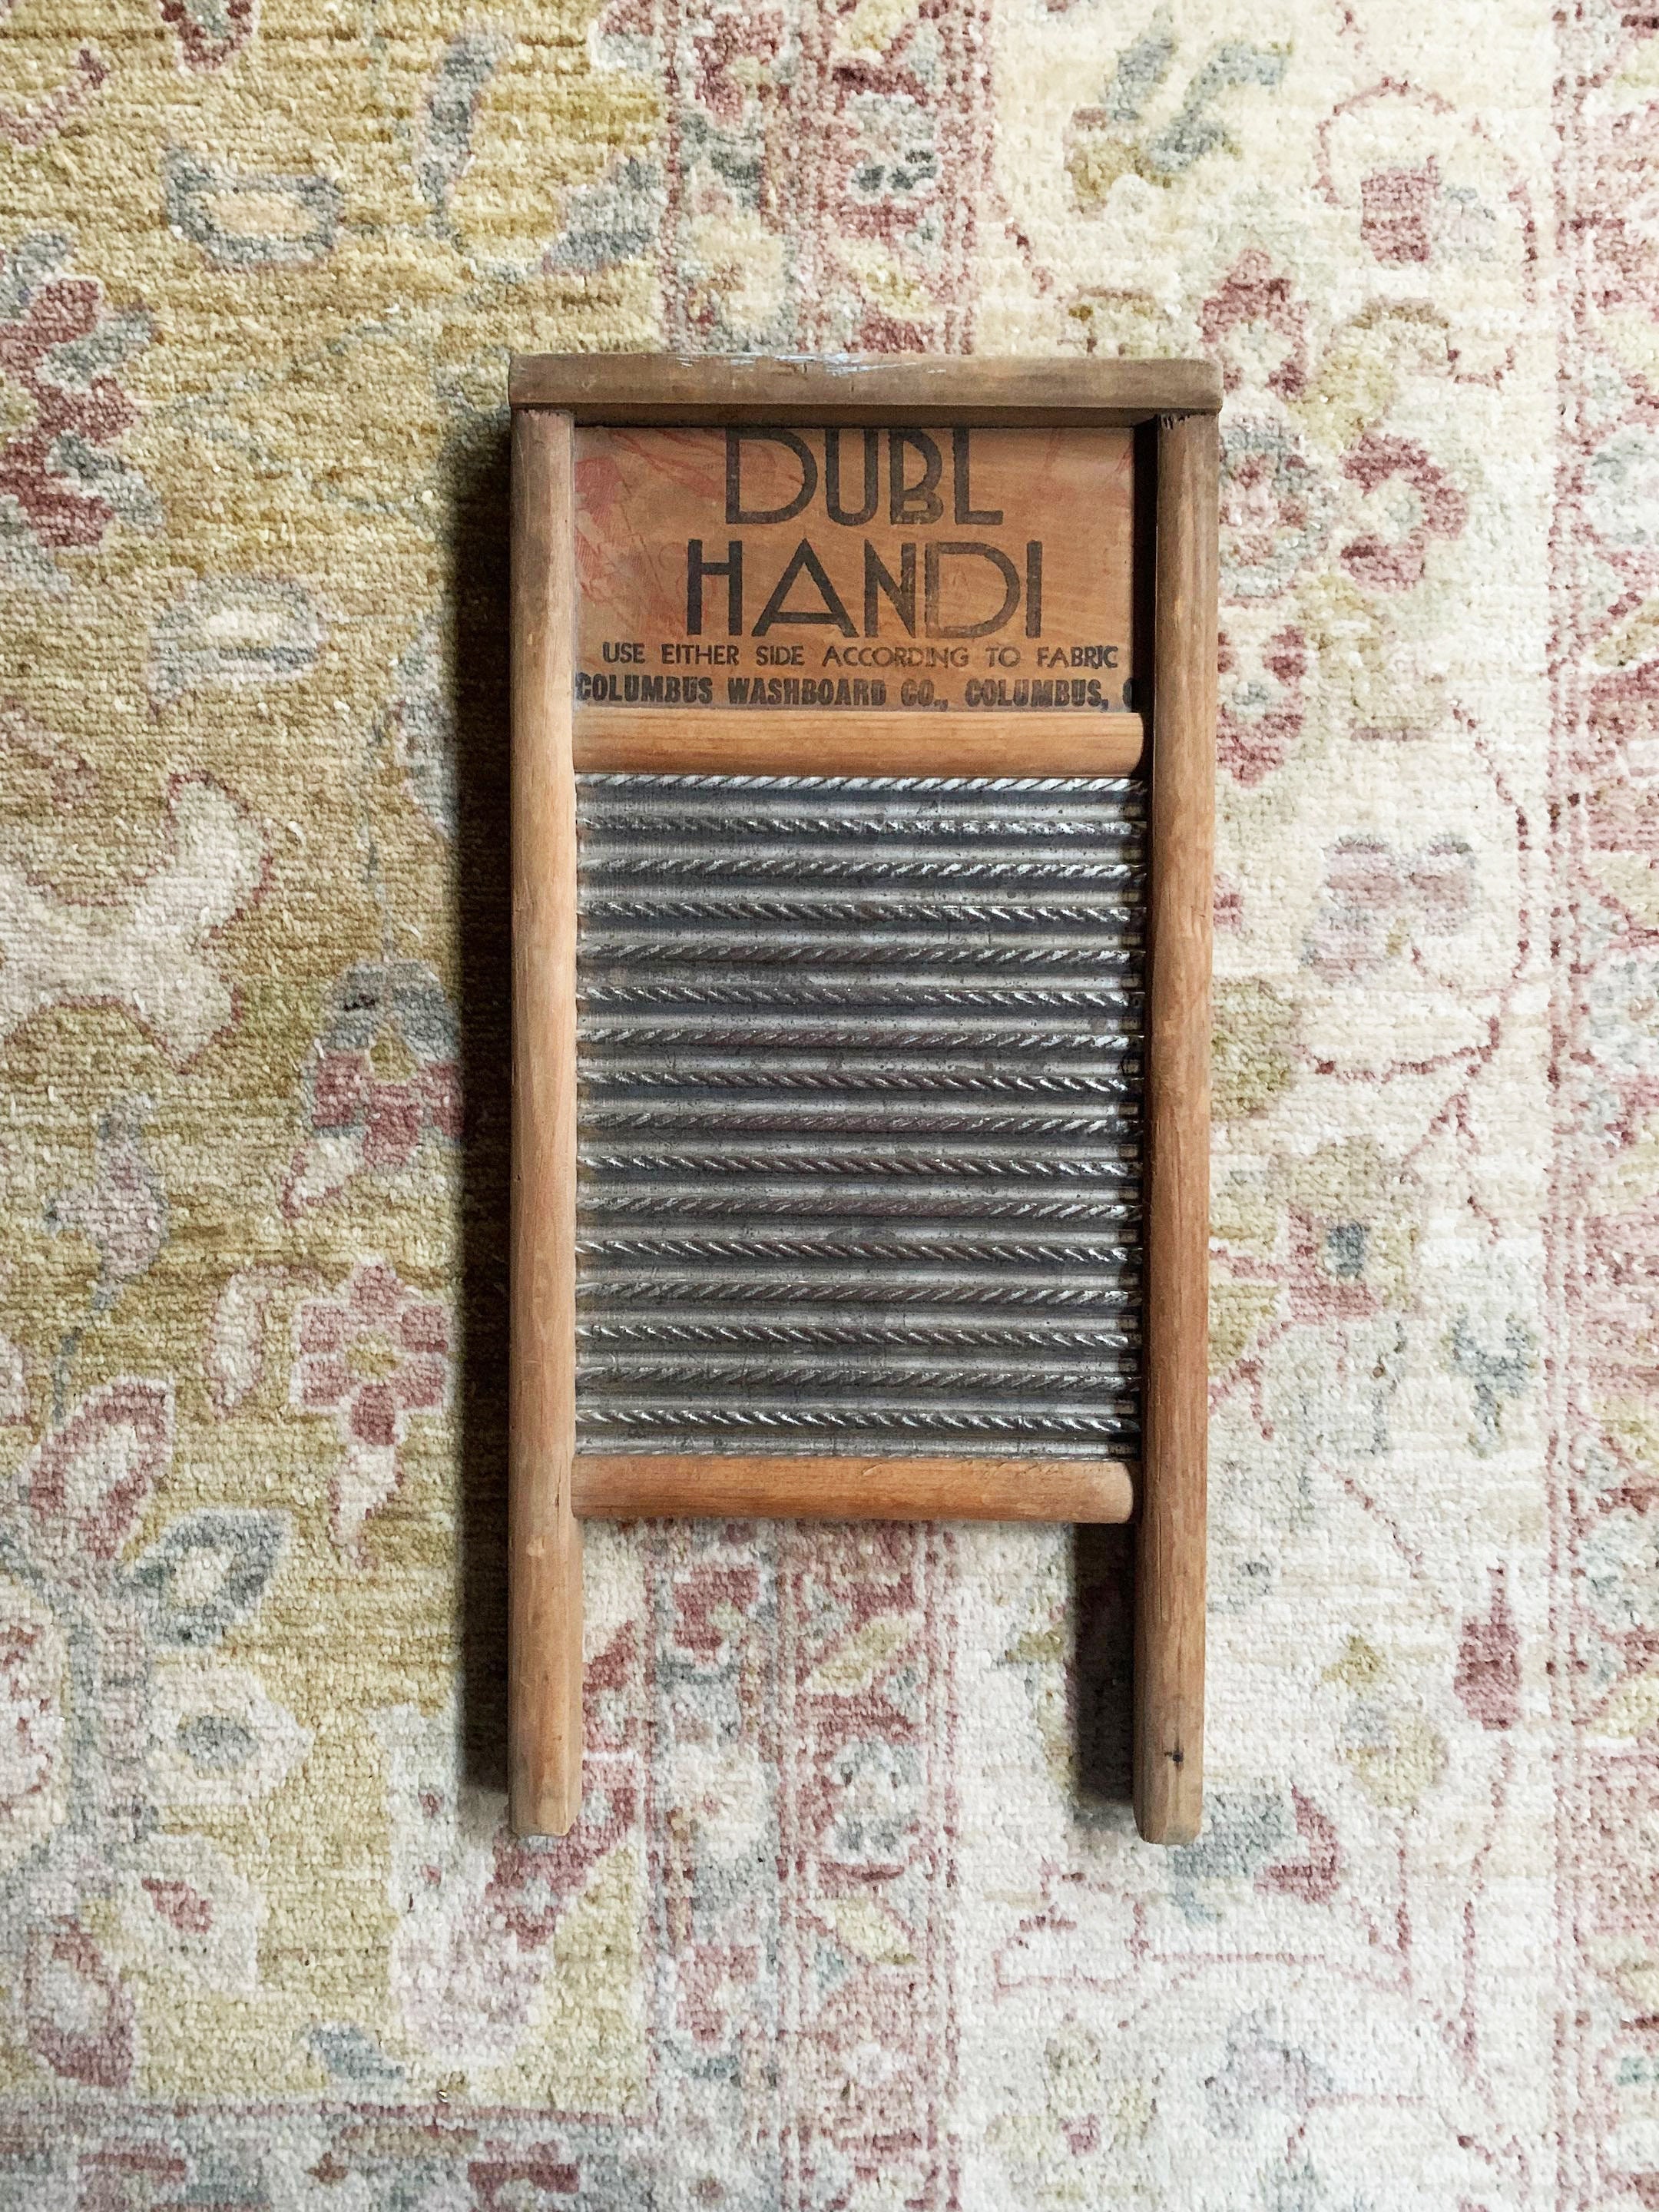 How to Use a Washboard